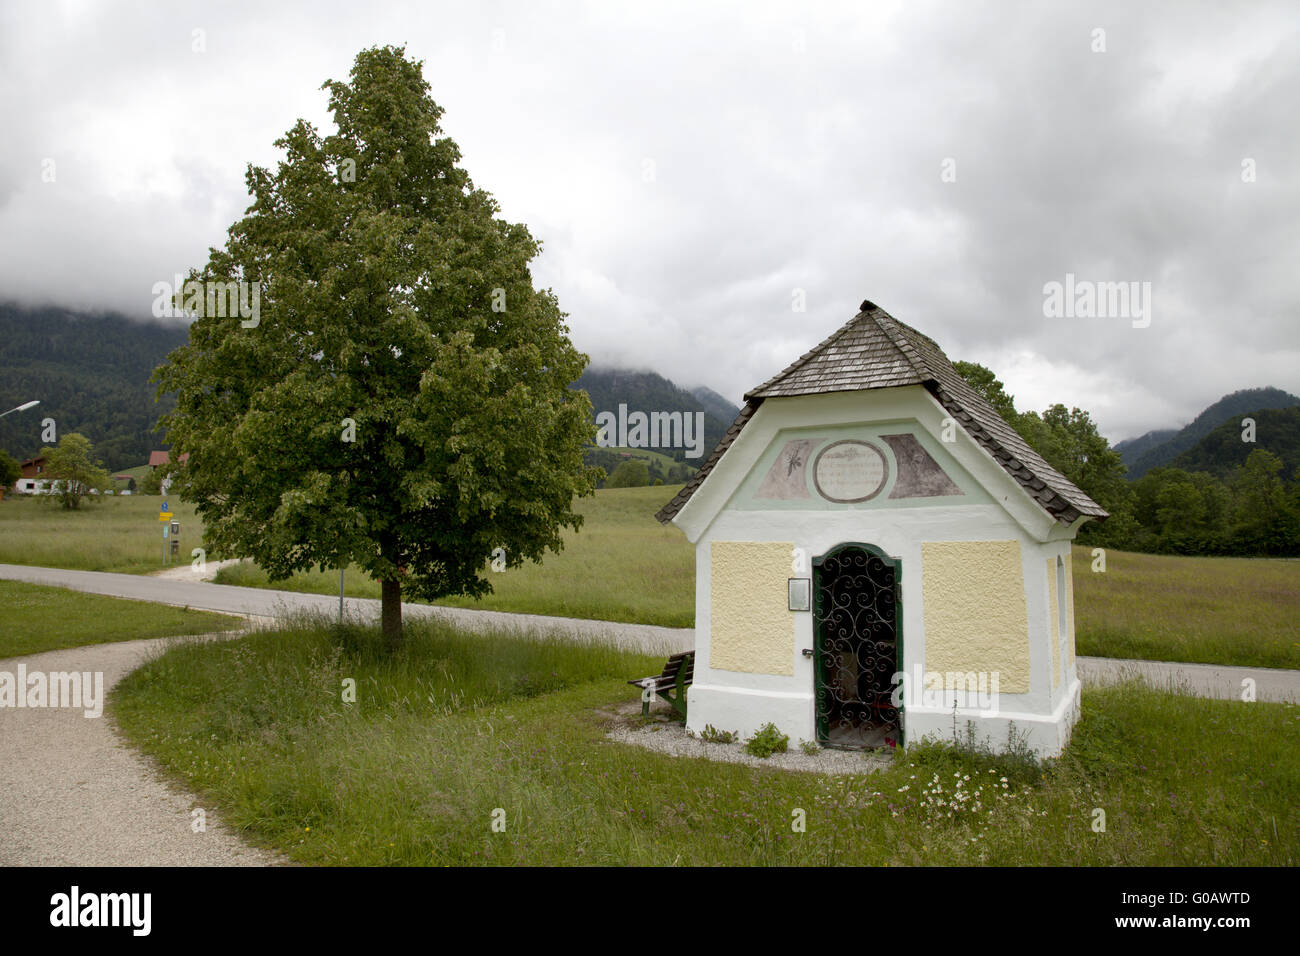 Chappel with tree Stock Photo